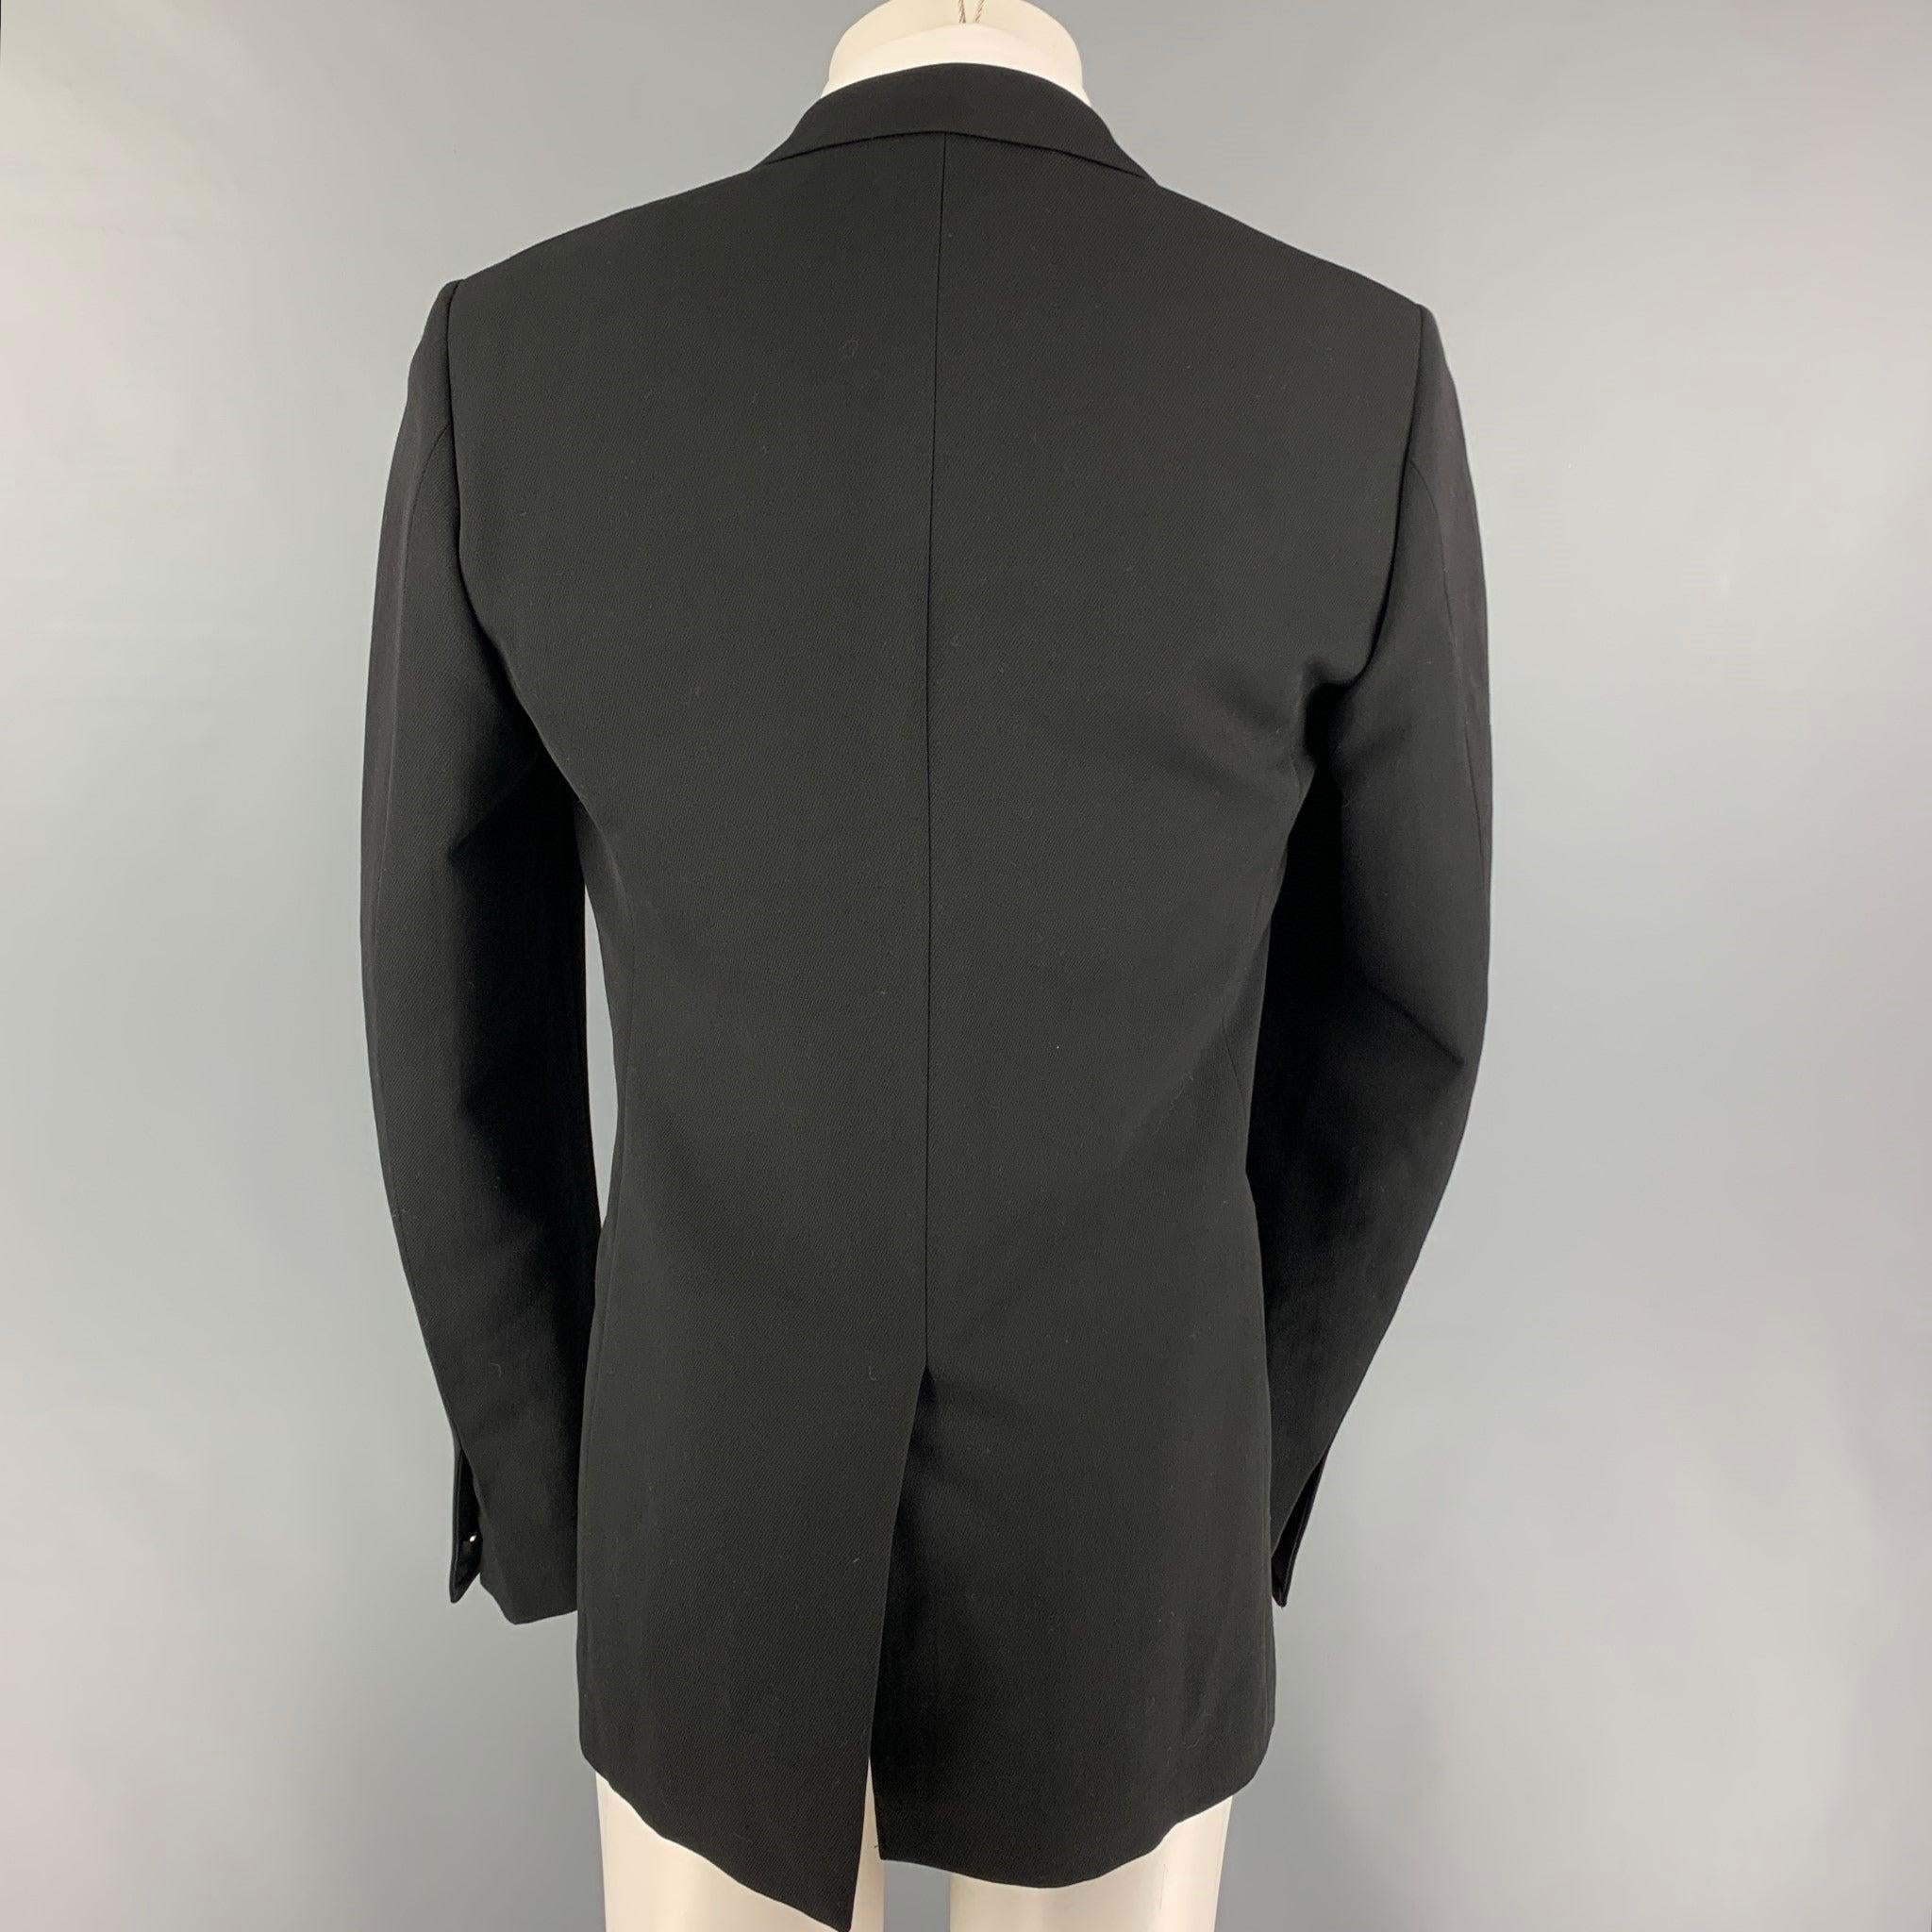 GIVENCHY Size 40 Black Notch Lapel Slim Fit Sport Coat In Good Condition For Sale In San Francisco, CA